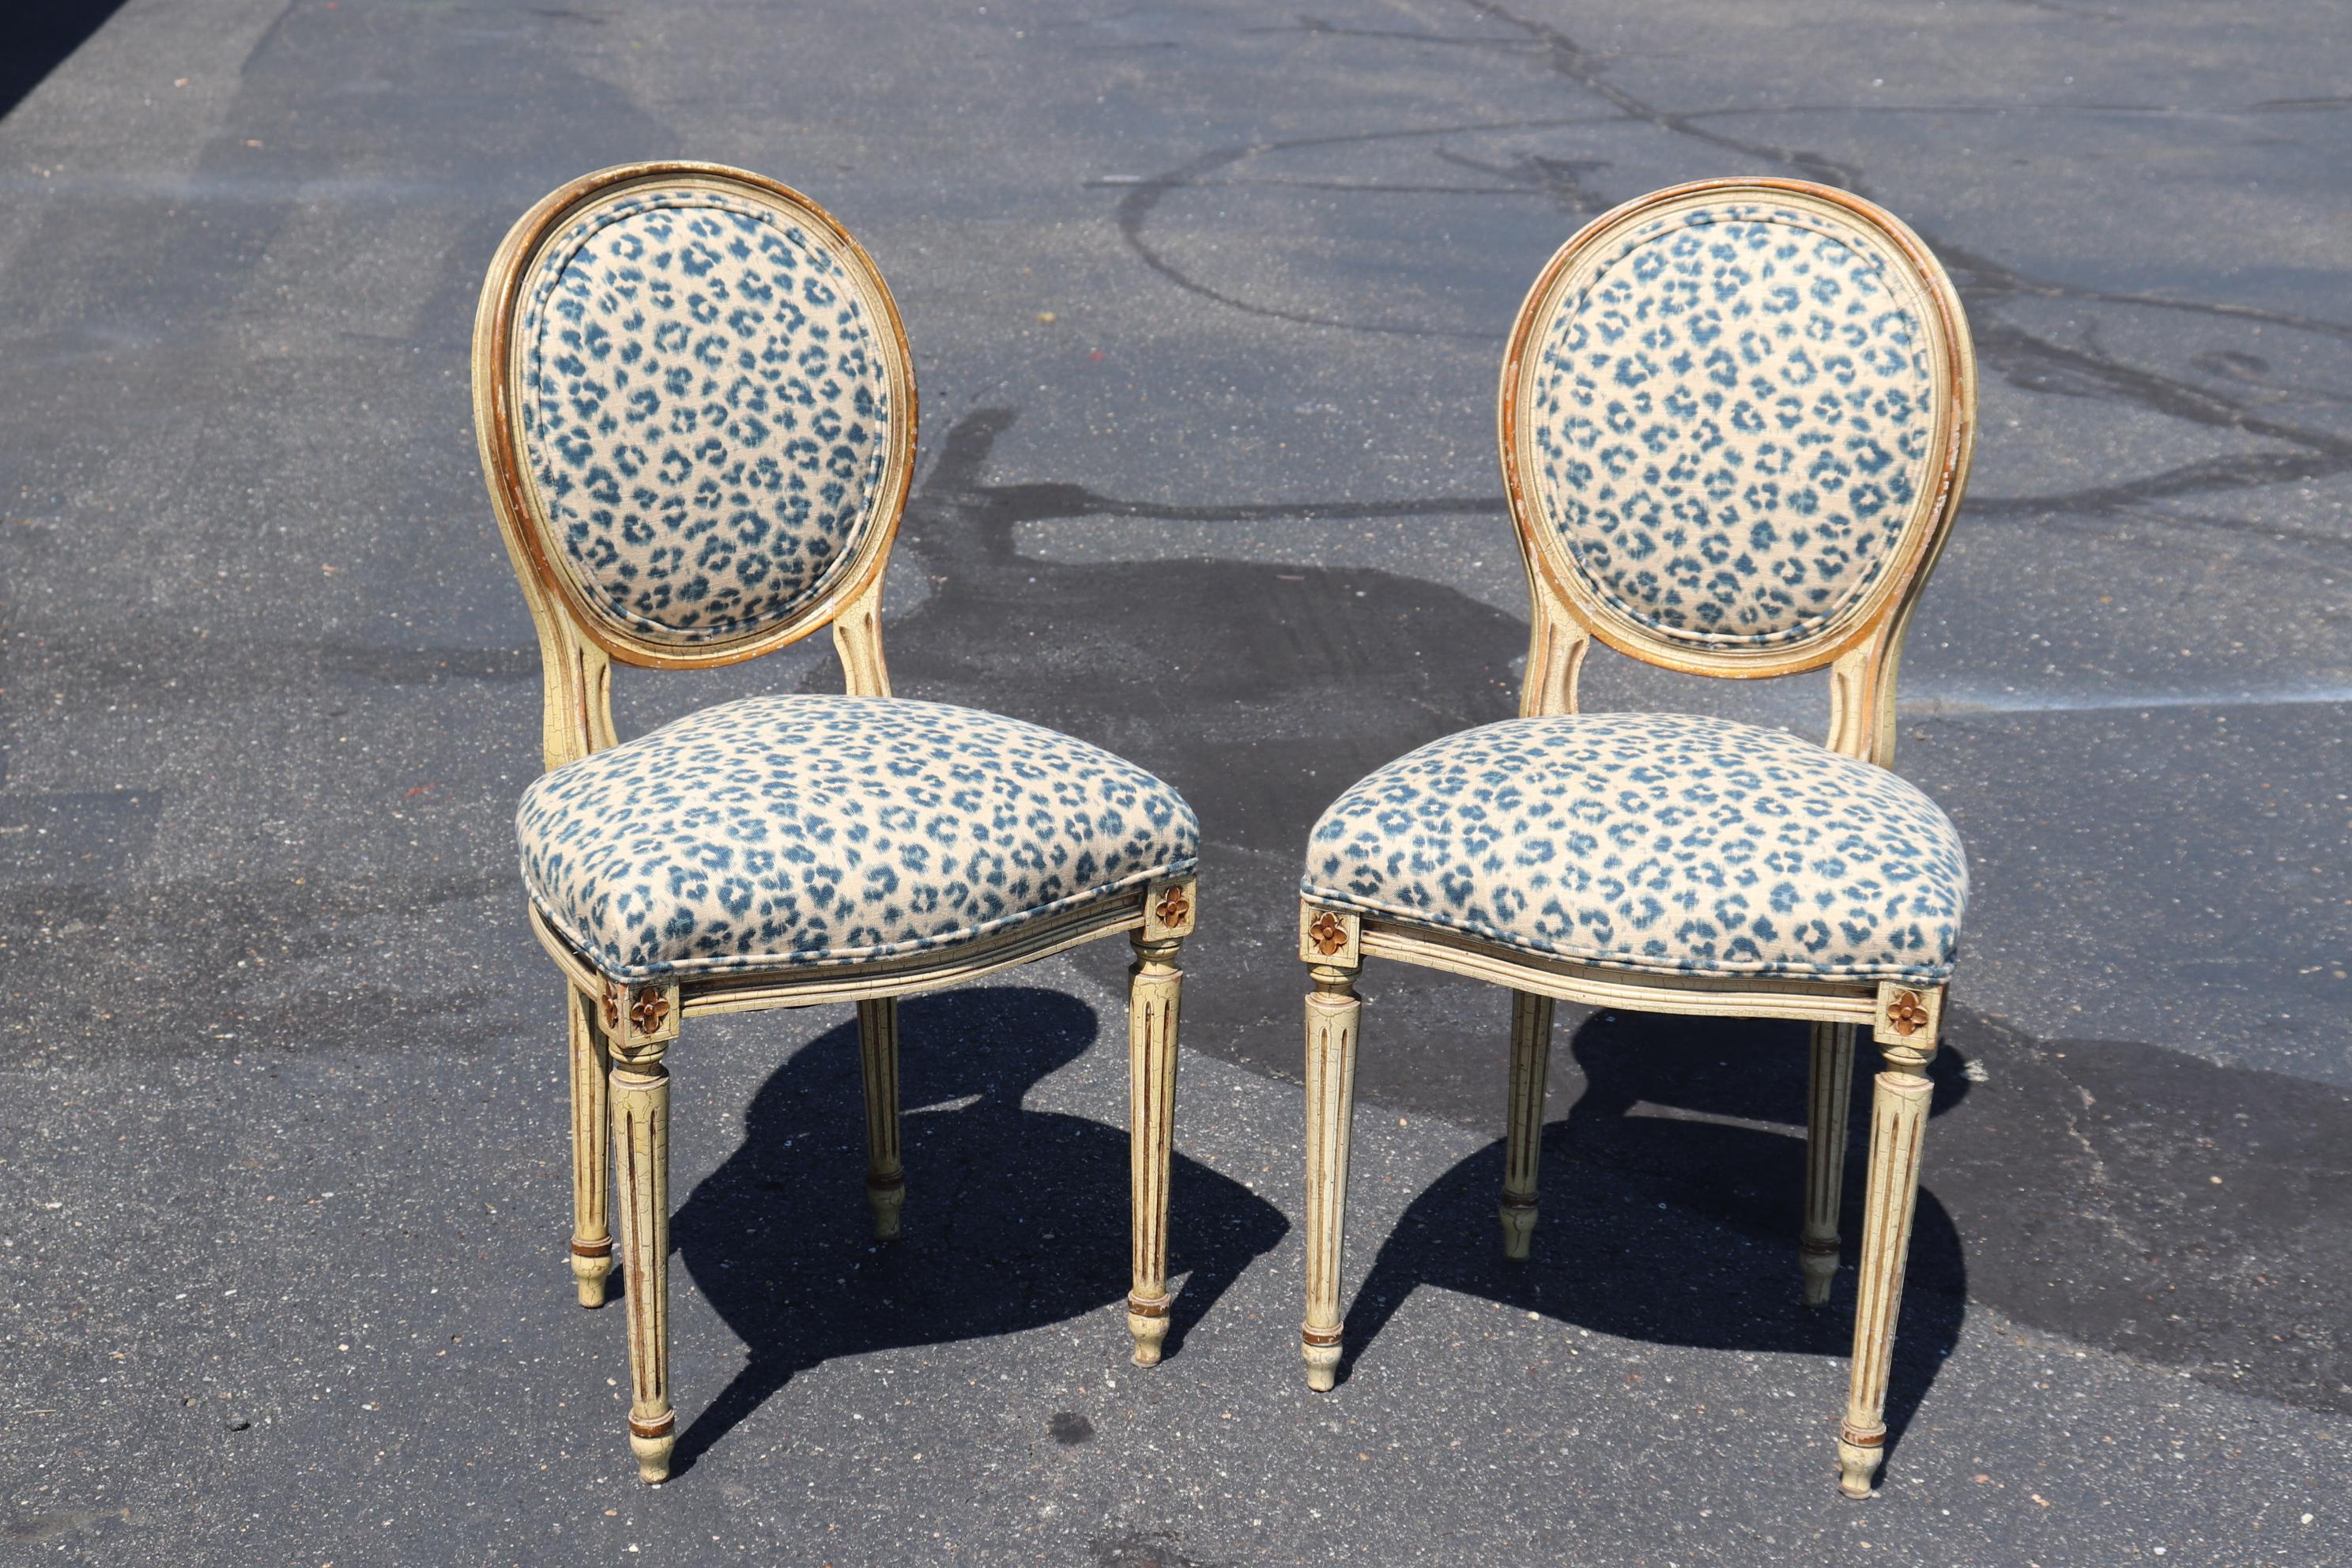 This is a gorgeous pair of distressed painted crackeled finish and chippy cameo back French chairs. The chairs are in a fantastic leopard upholtsery print (not real leopard folks) and have great chippy distressed finished paint. The gframes are